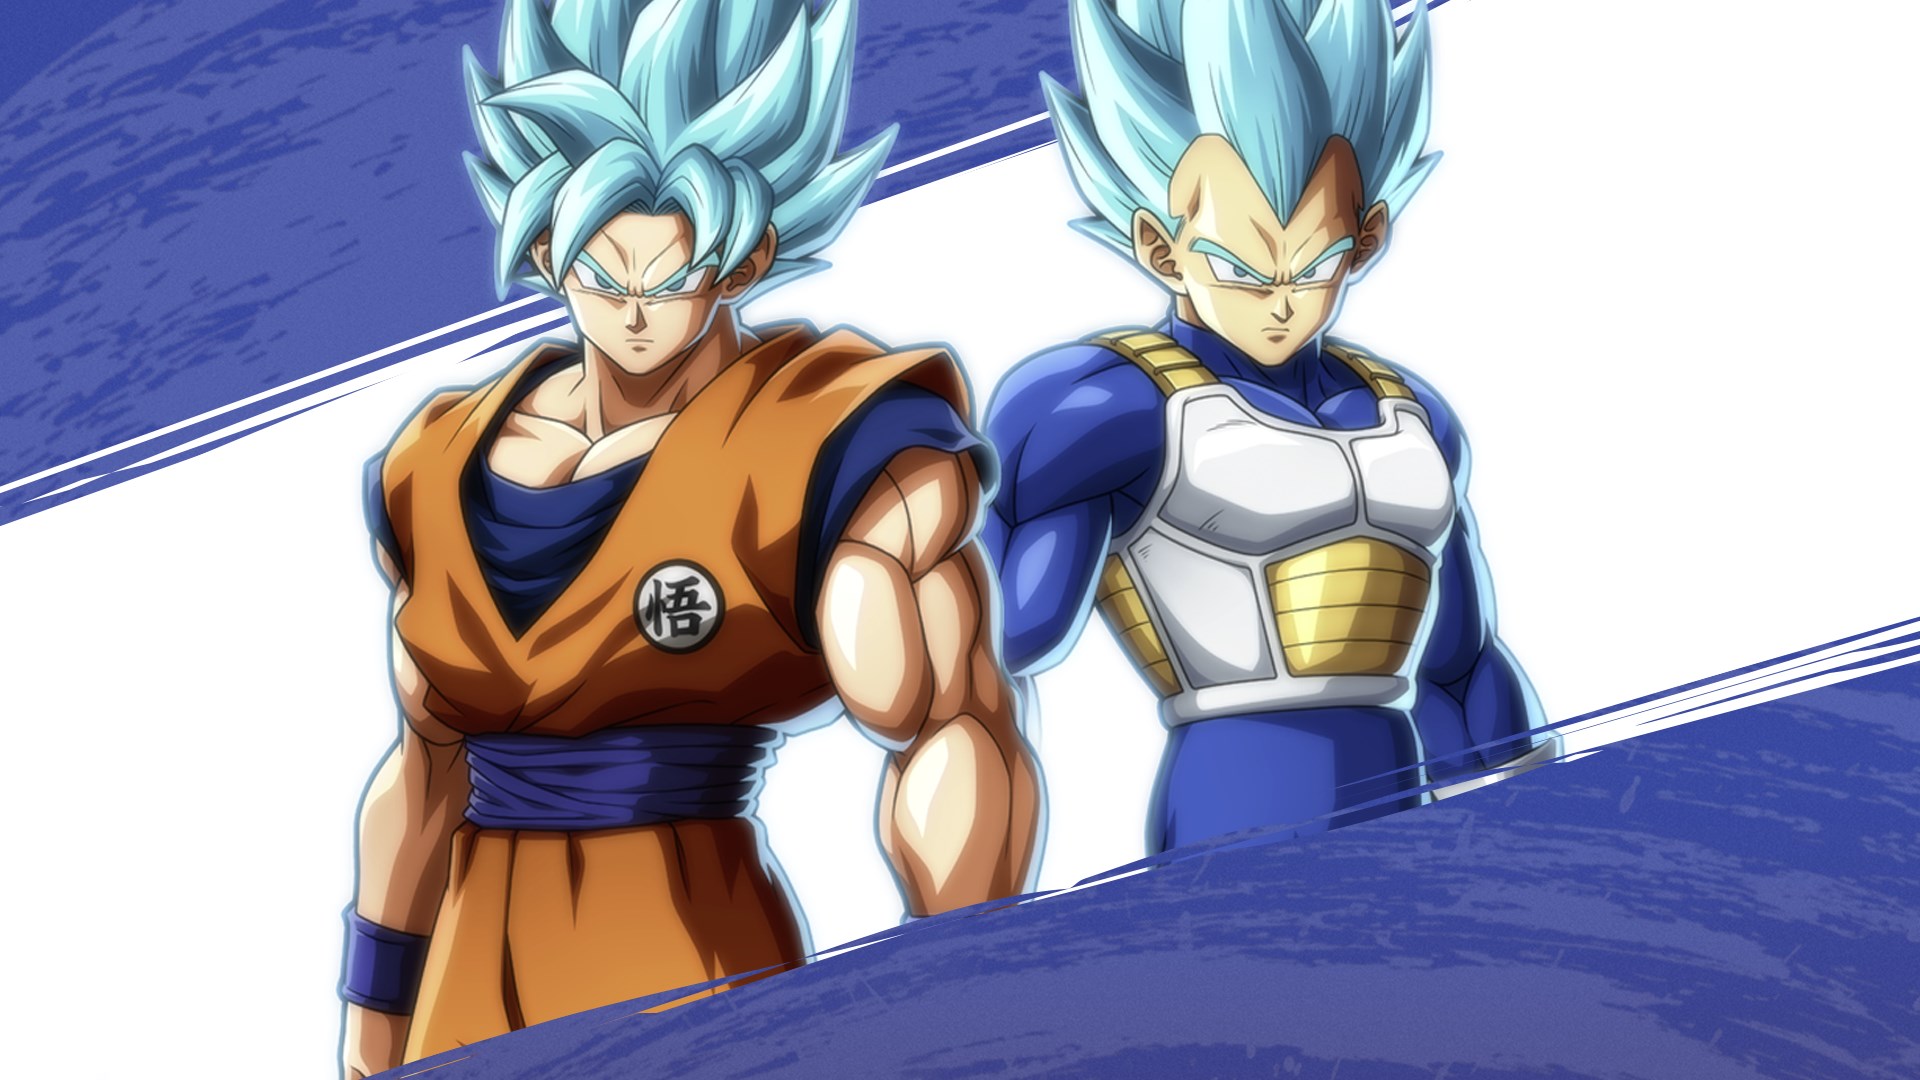 Dragon Ball Super Chapter 58 Leaks, Spoilers Vegeta will help Goku in the Fight against Moro